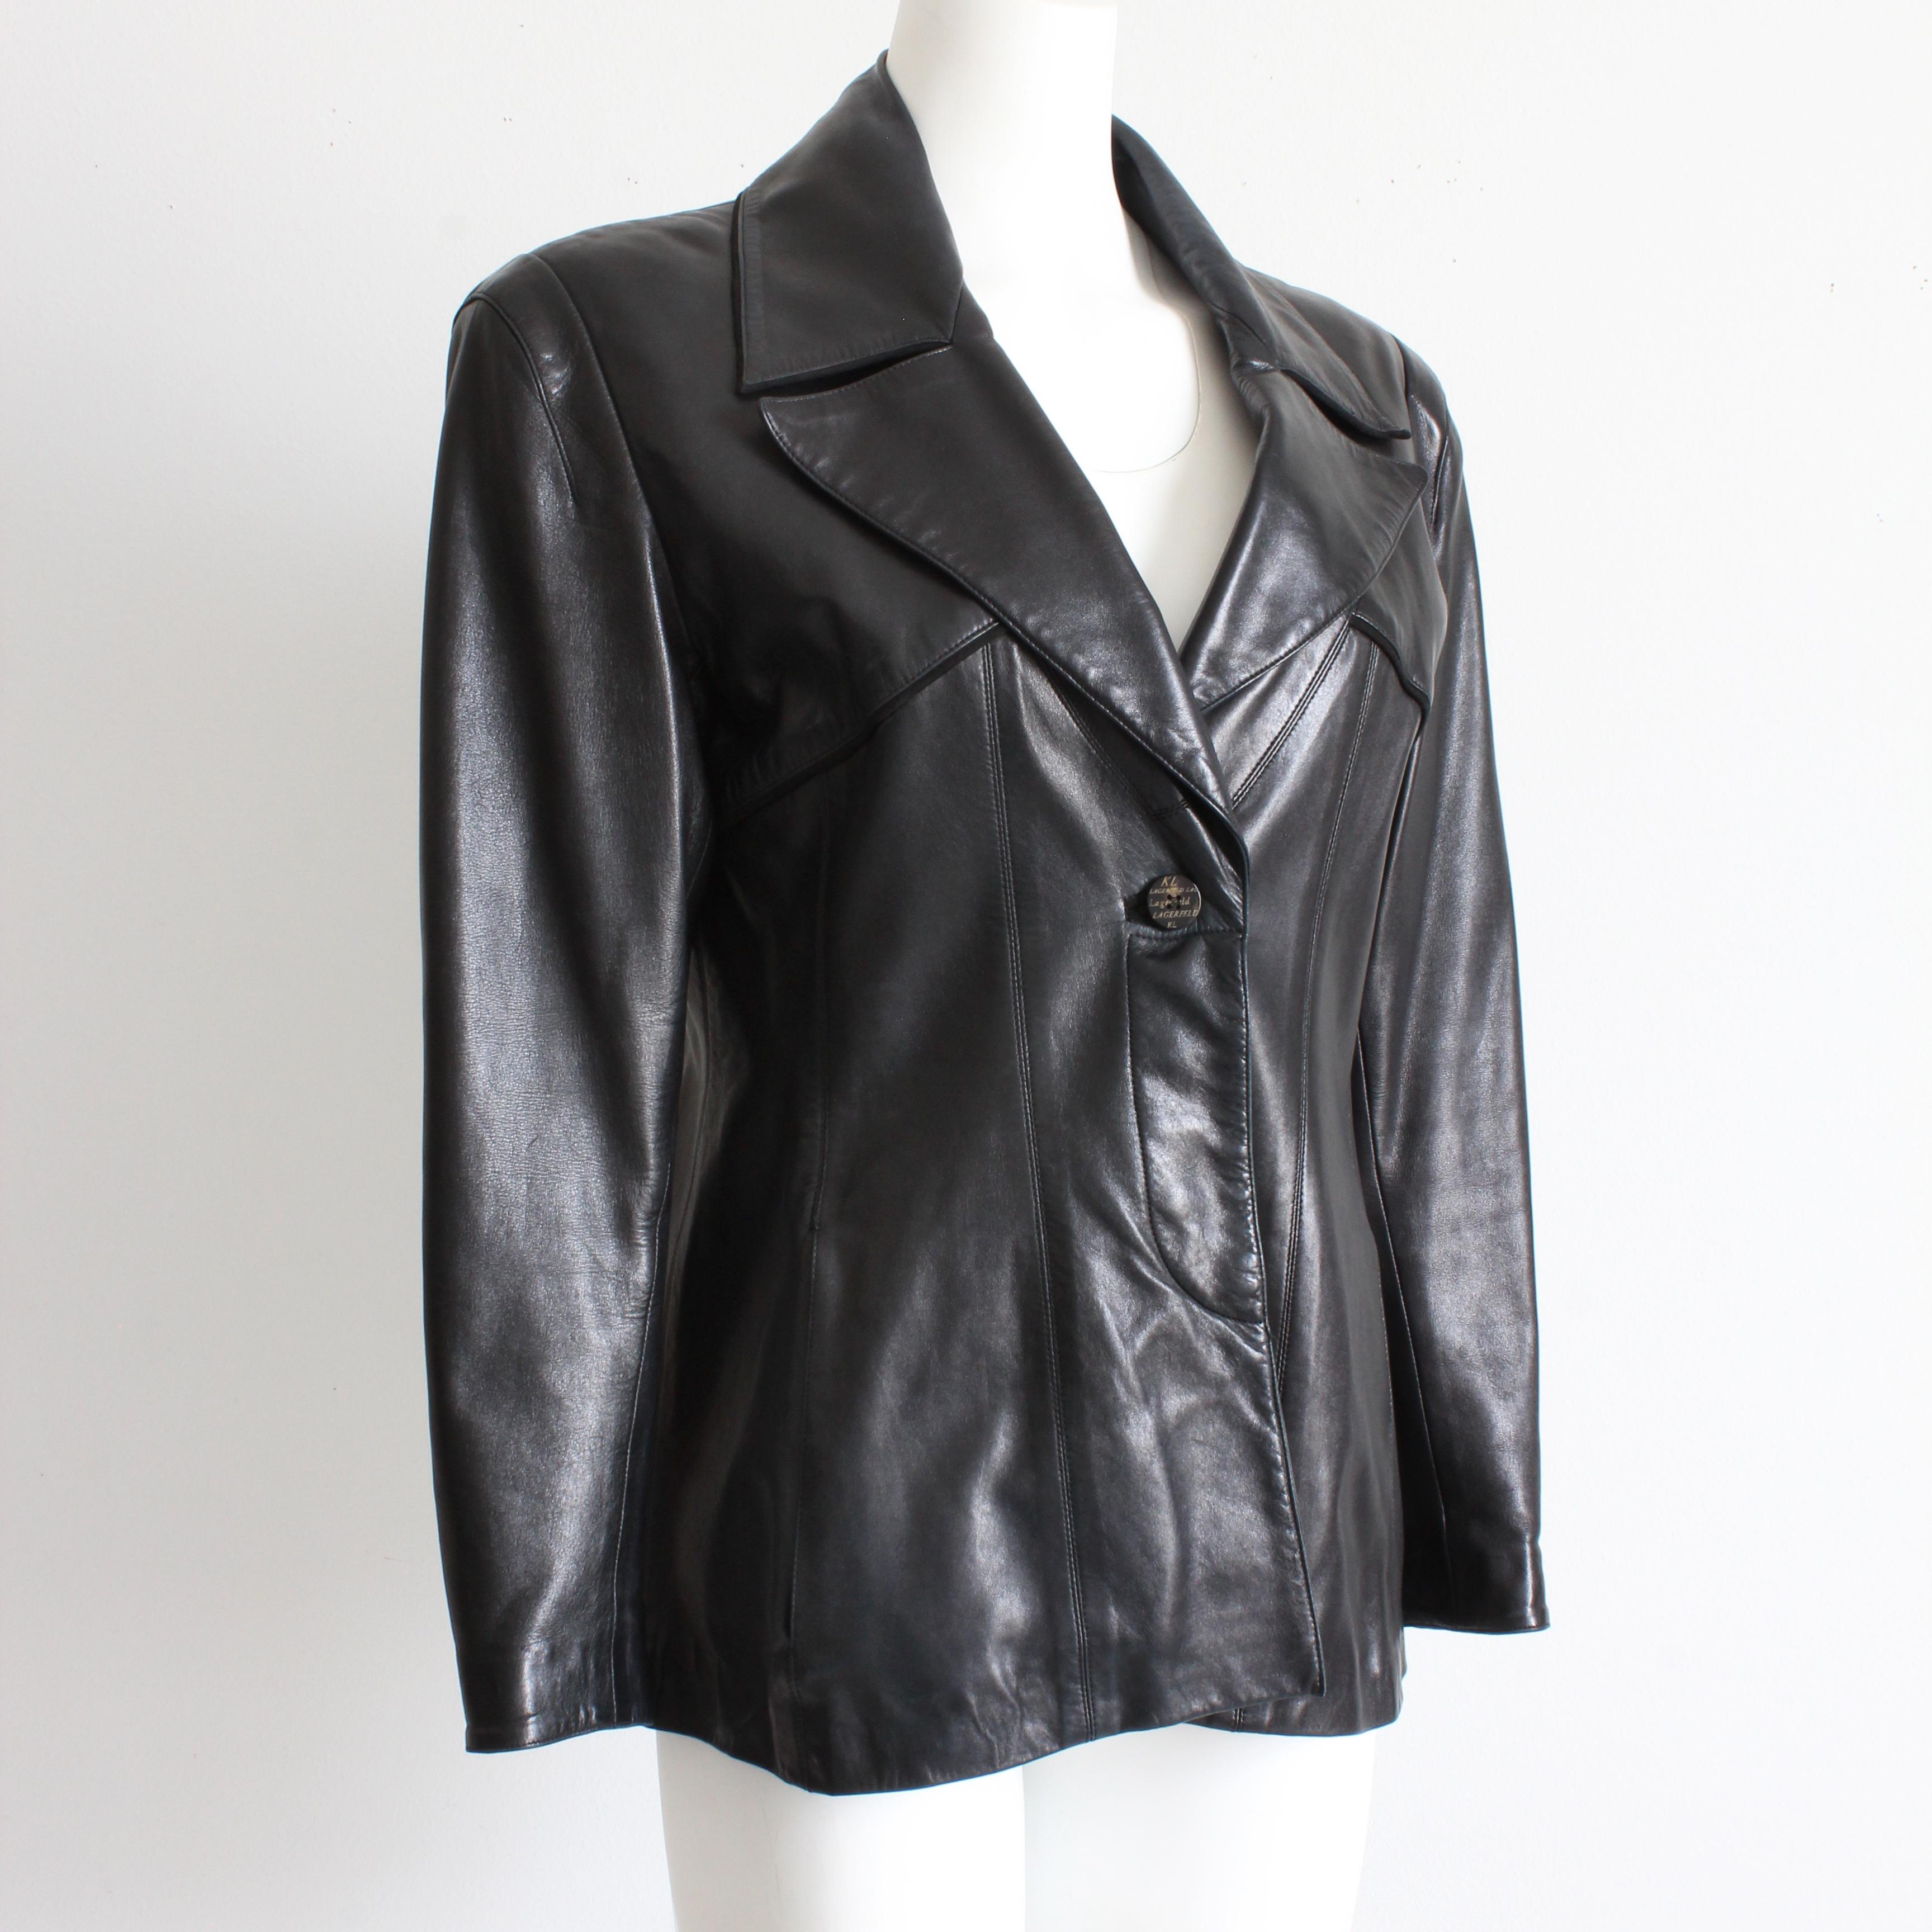 This incredibly supple black lambskin jacket was designed by Karl Lagerfeld and sold by Fred Hayman Beverly Hills, most likely in the 1990s.  Fred Hayman, also known as the 'Godfather of Rodeo Drive' was took over the original Giorgio Beverly Hills